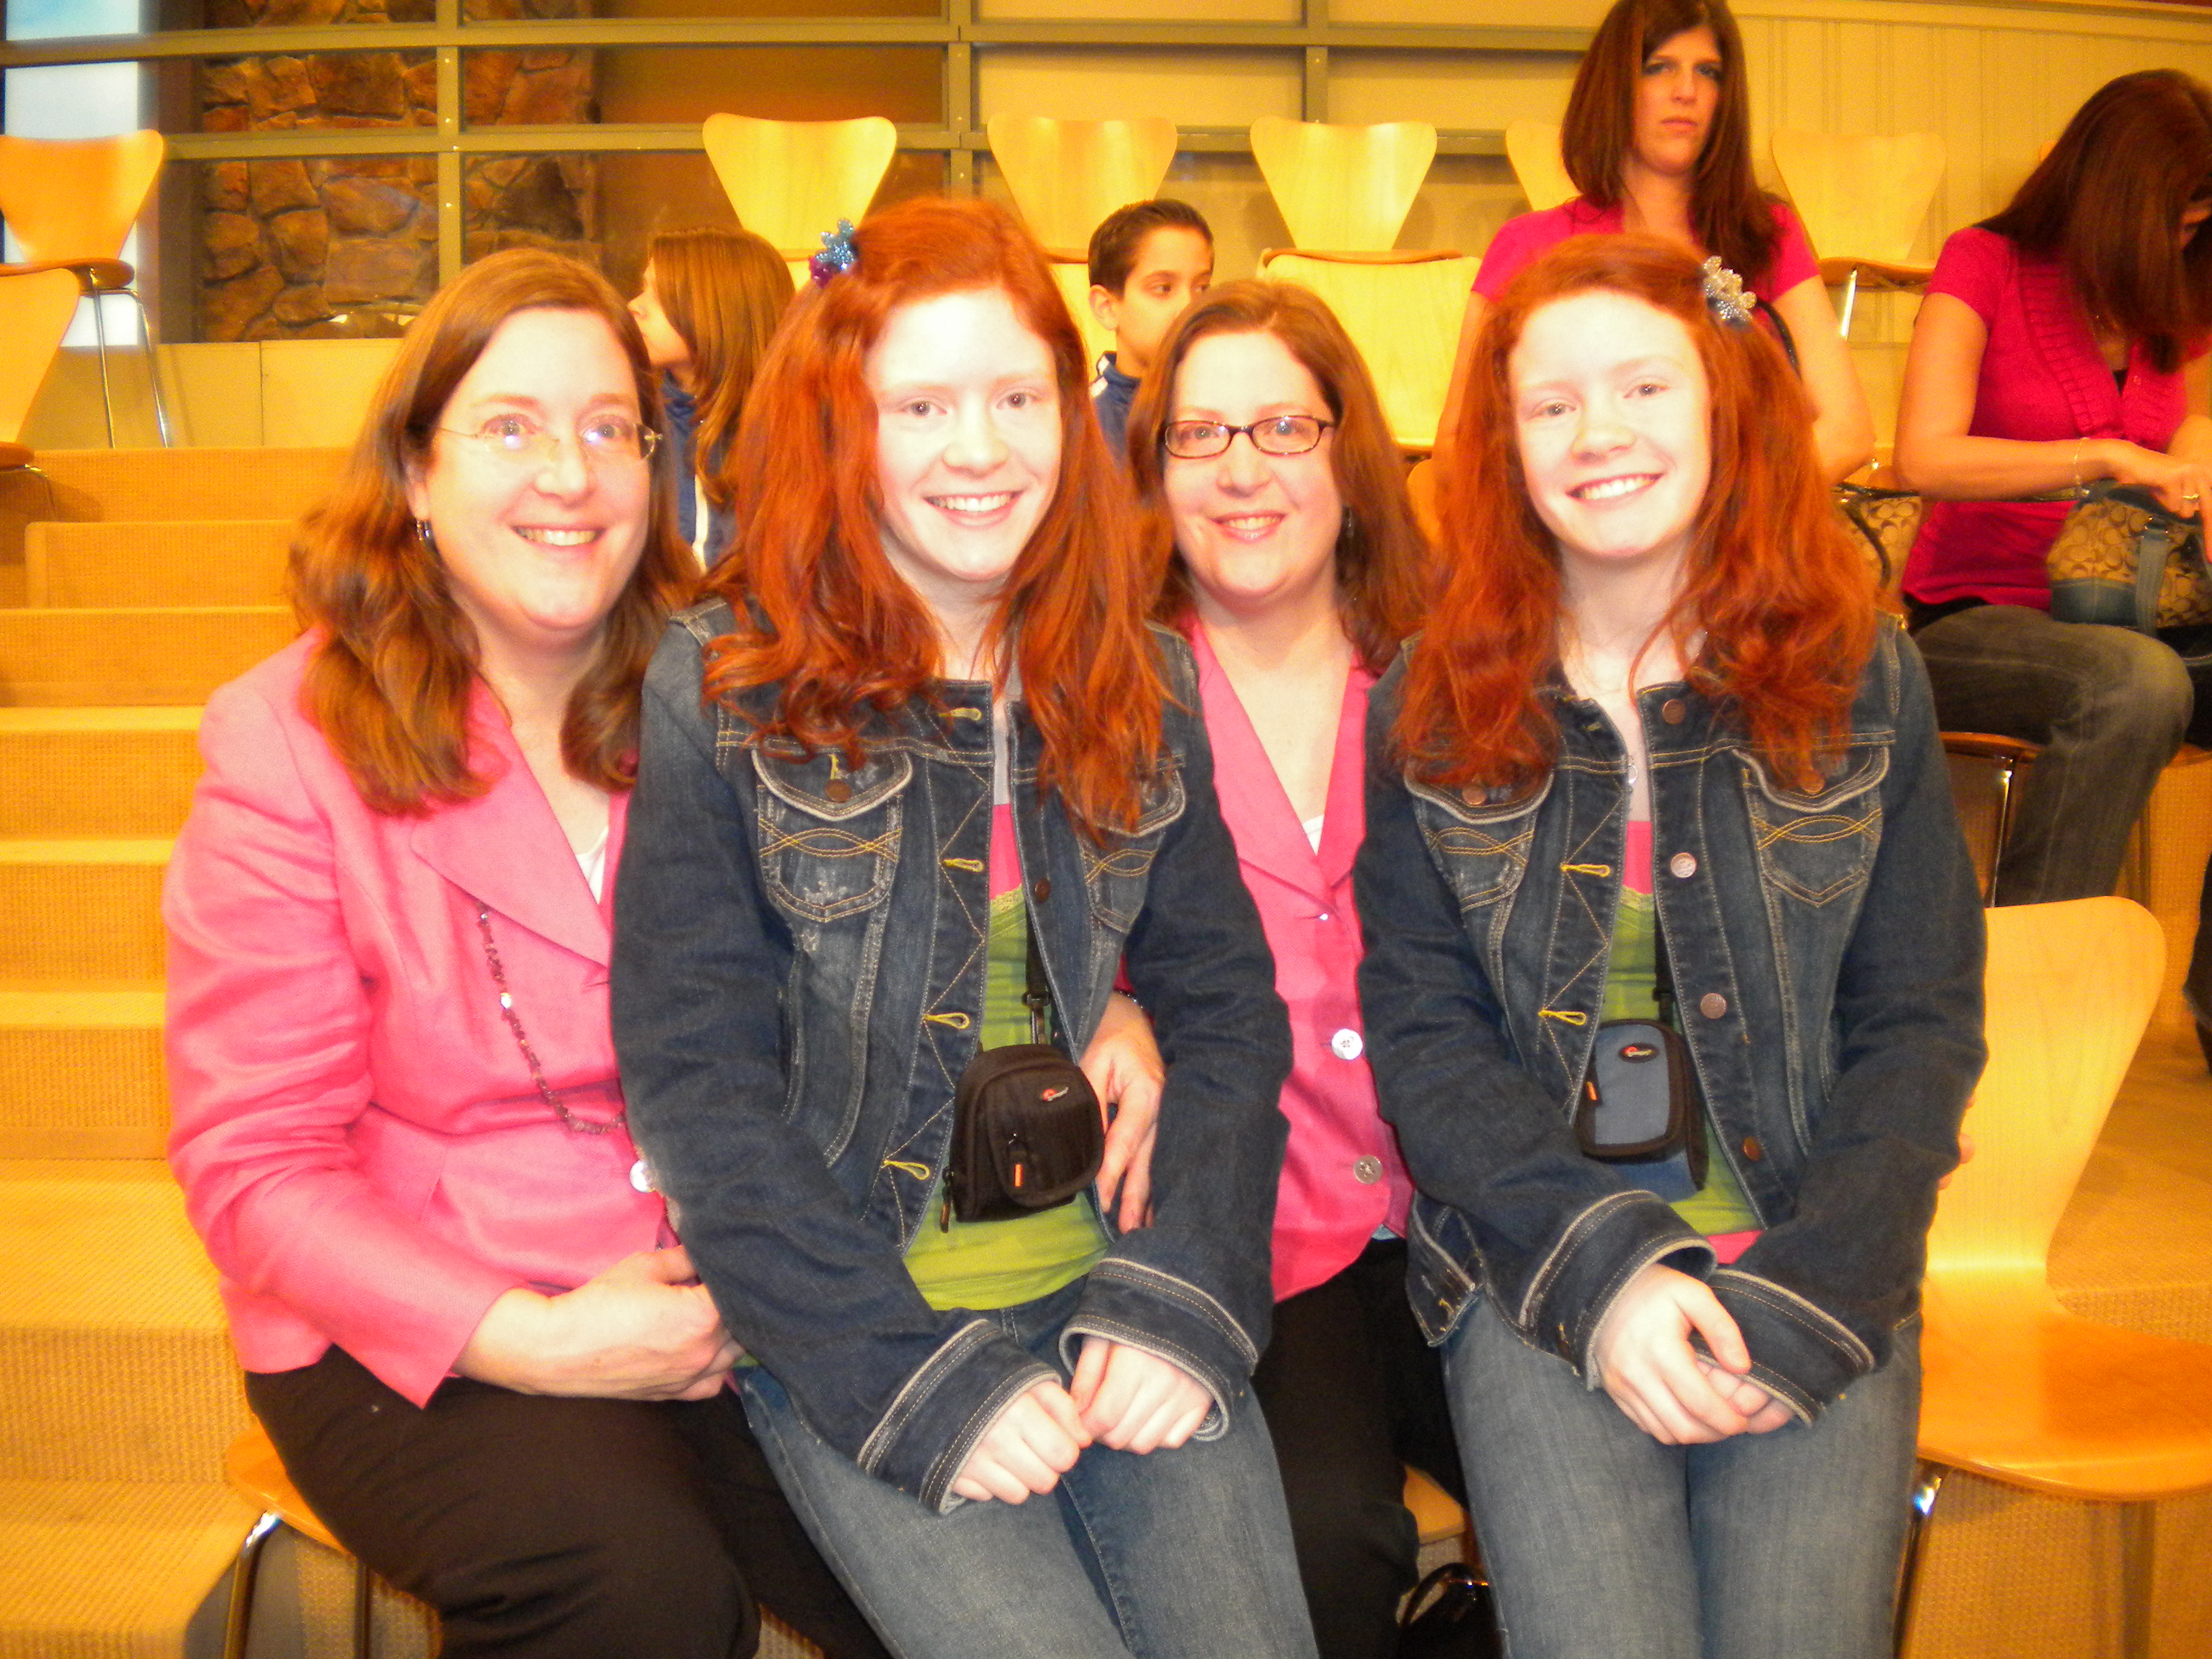 Jane Aronds, her twin sister, Grace Aronds, and their mother with her twin sister on the set of the Martha Stewart Show 2010